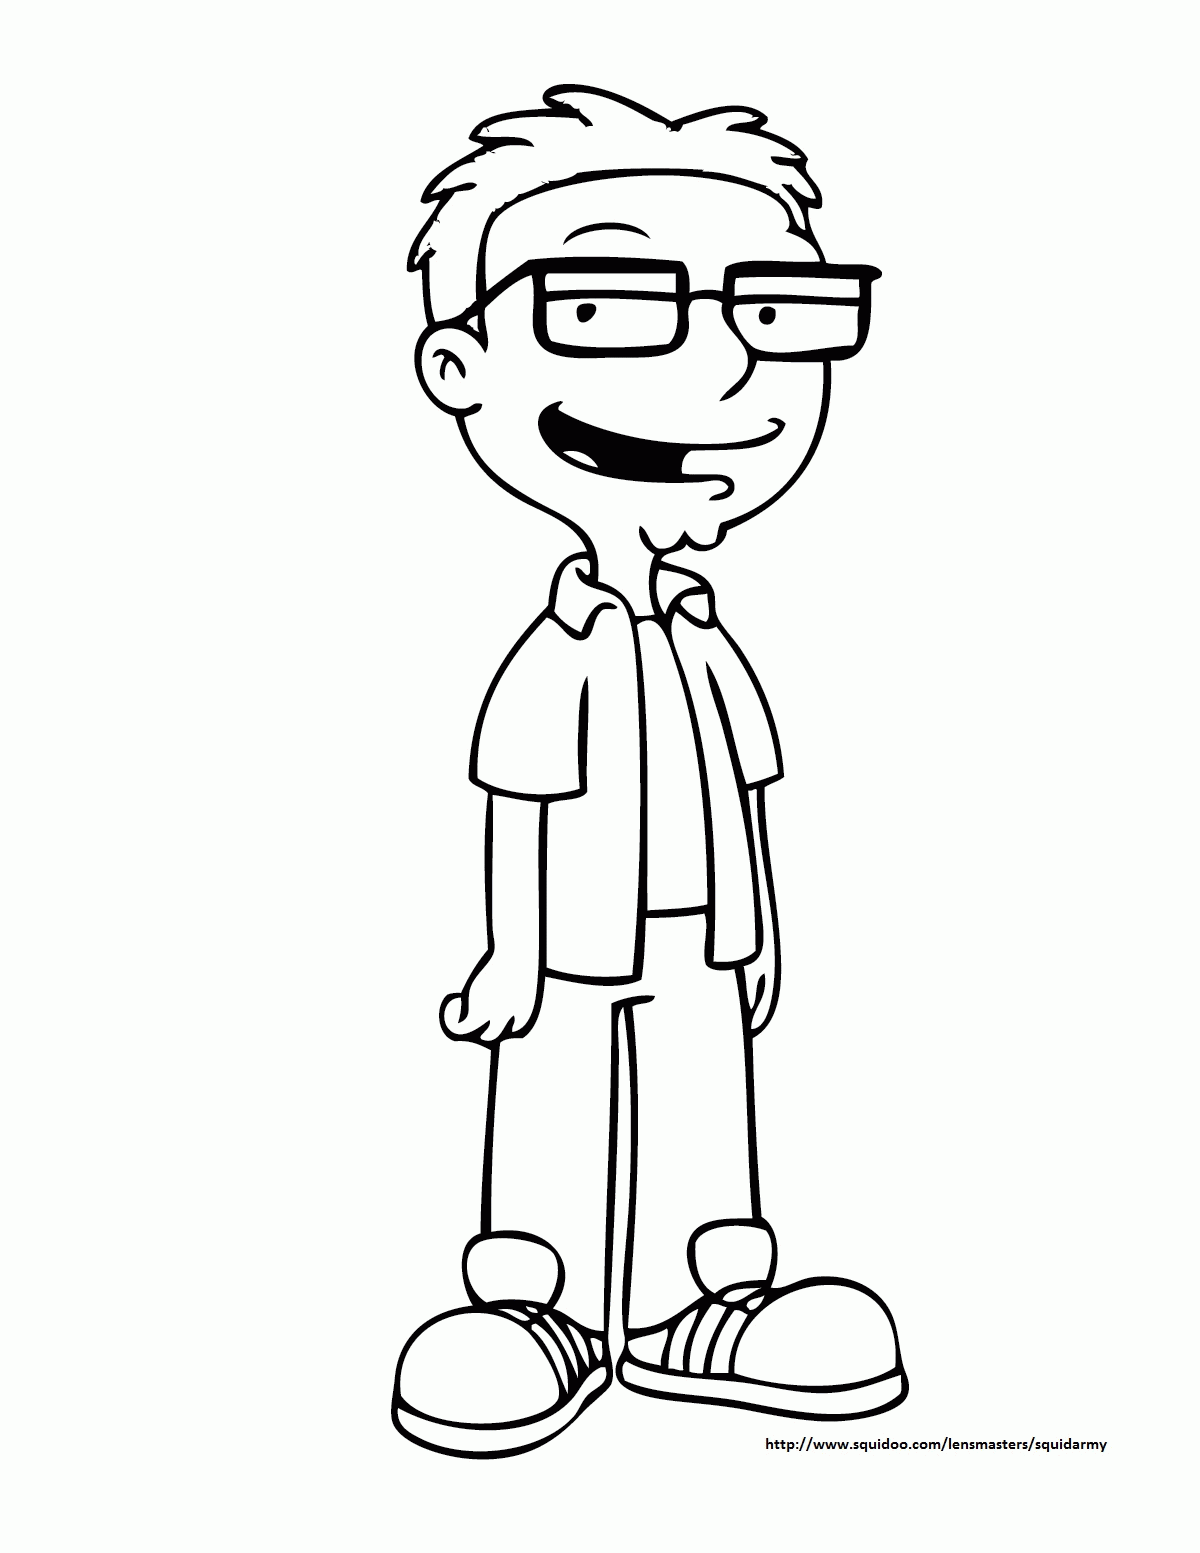 Clip Arts Related To : drawing stan smith american dad. 